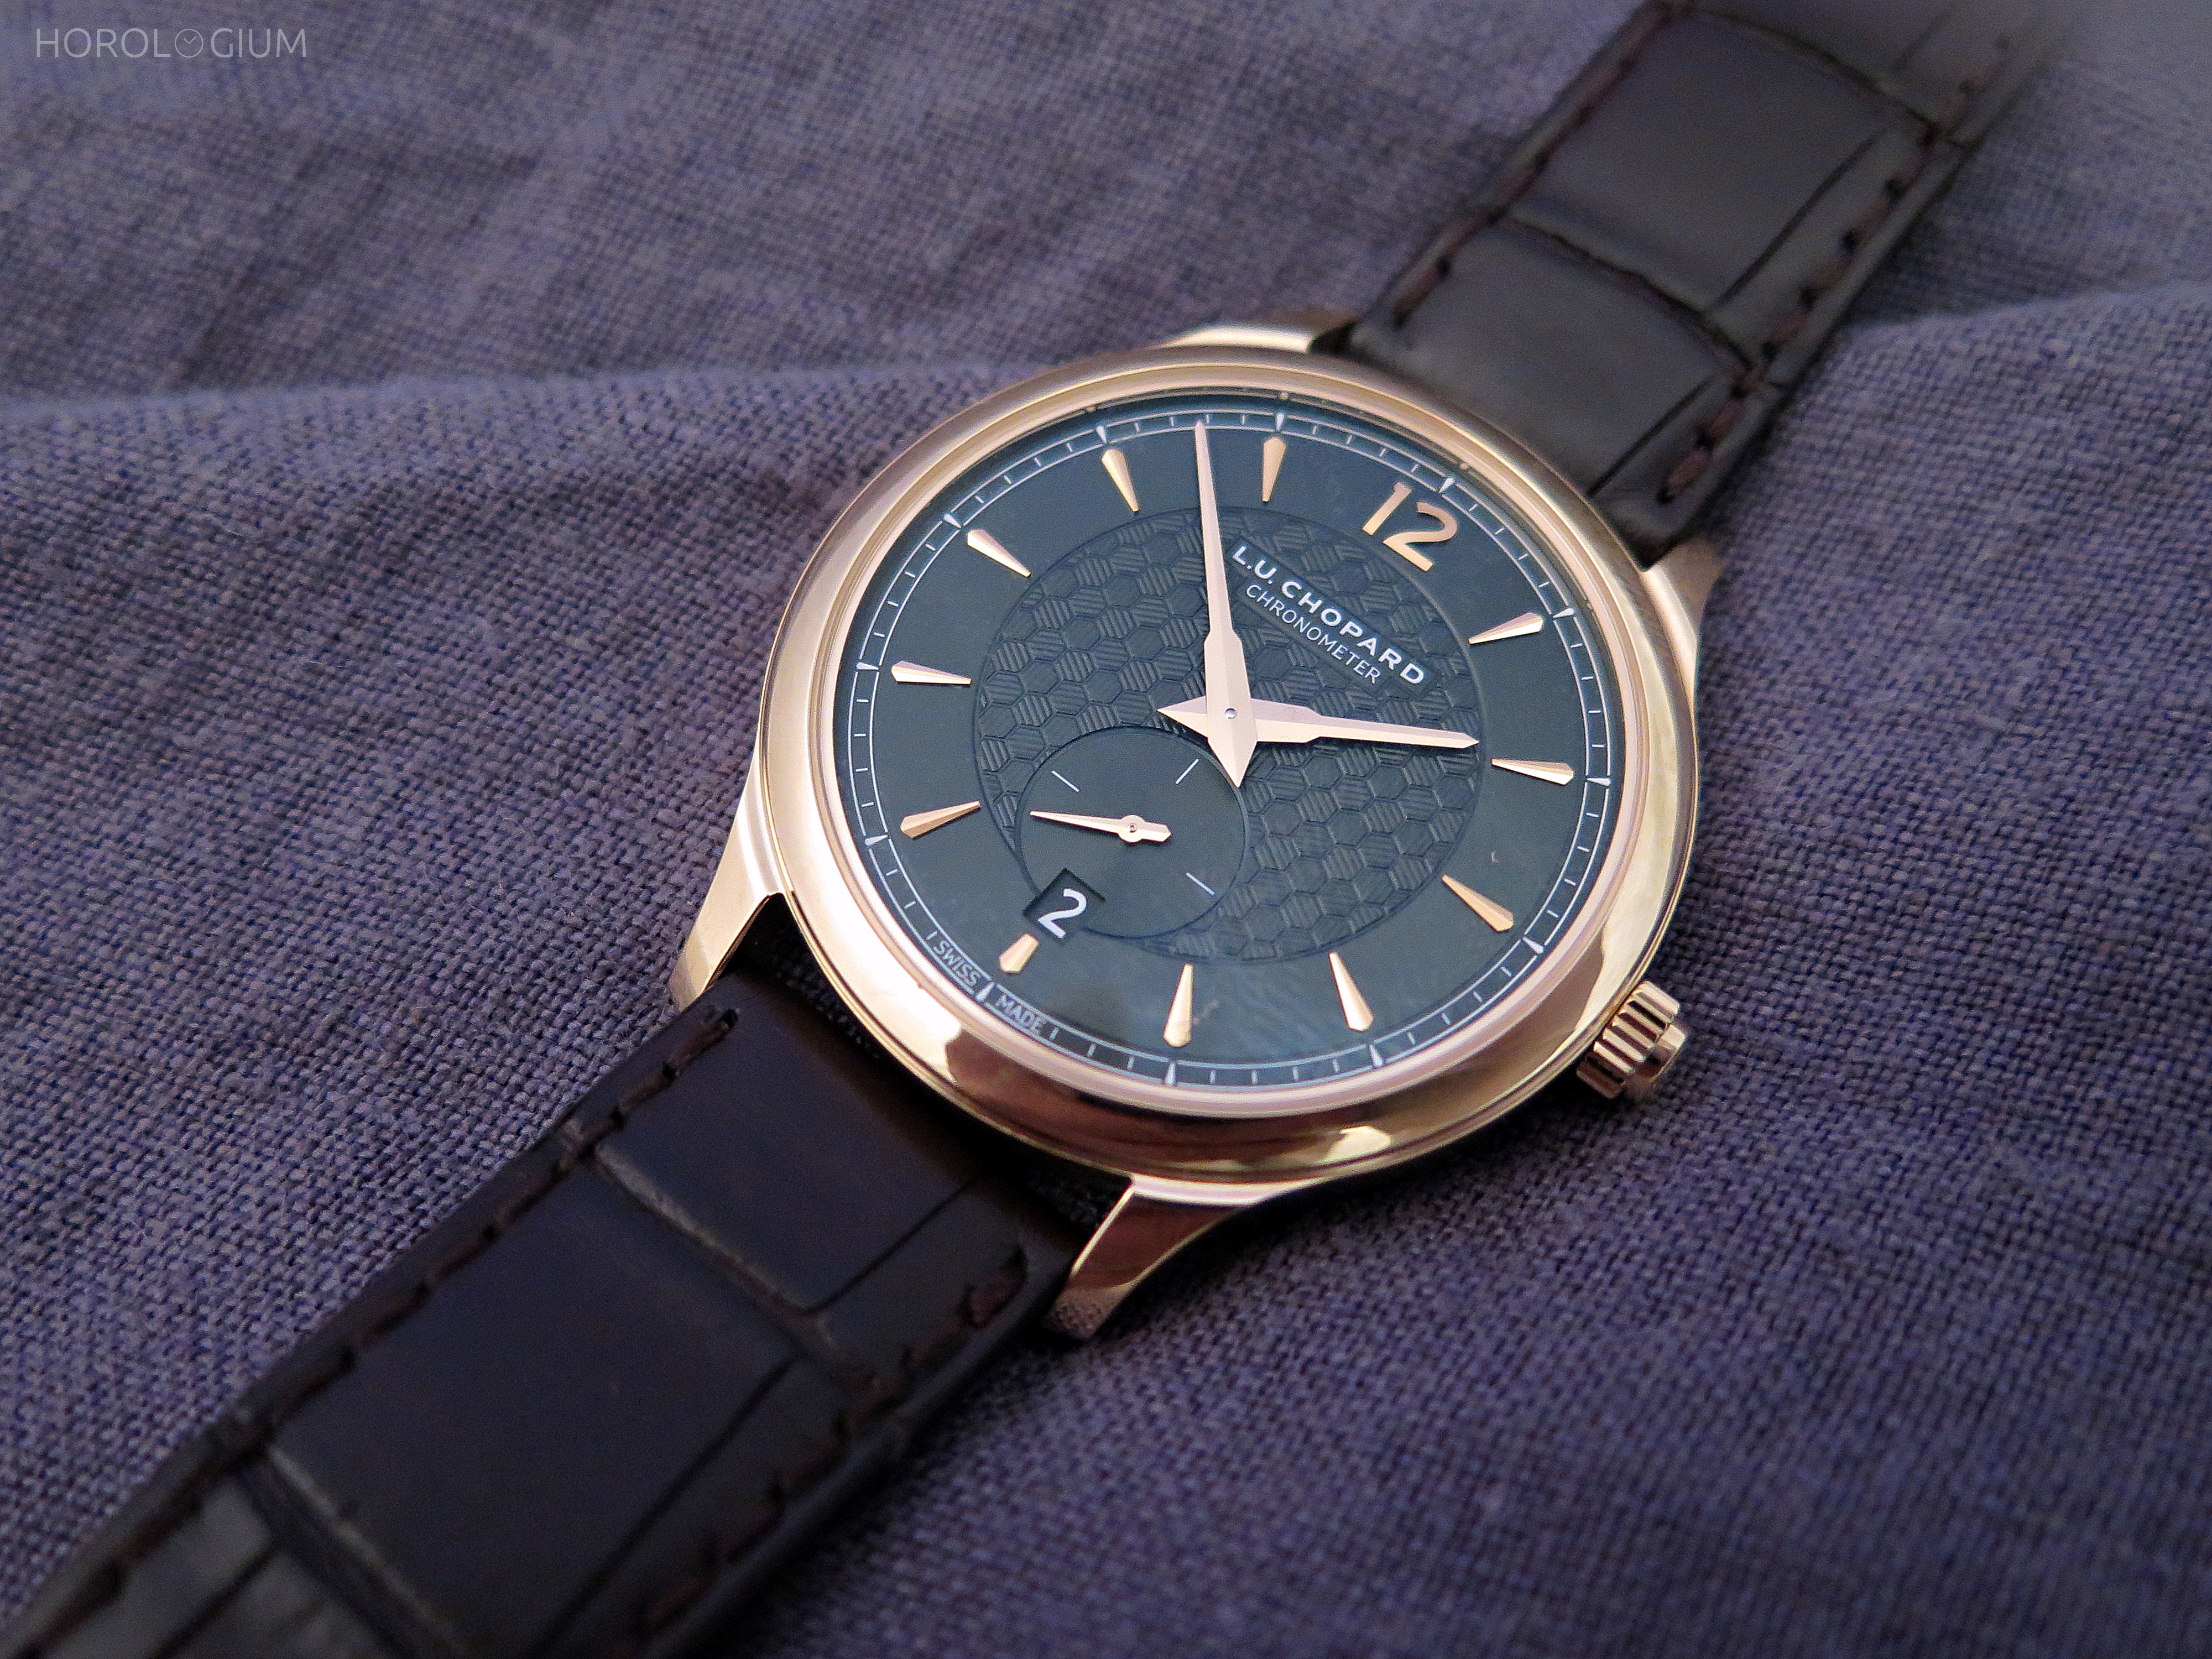 Chopard - LUC XPS 1860 - first impressions